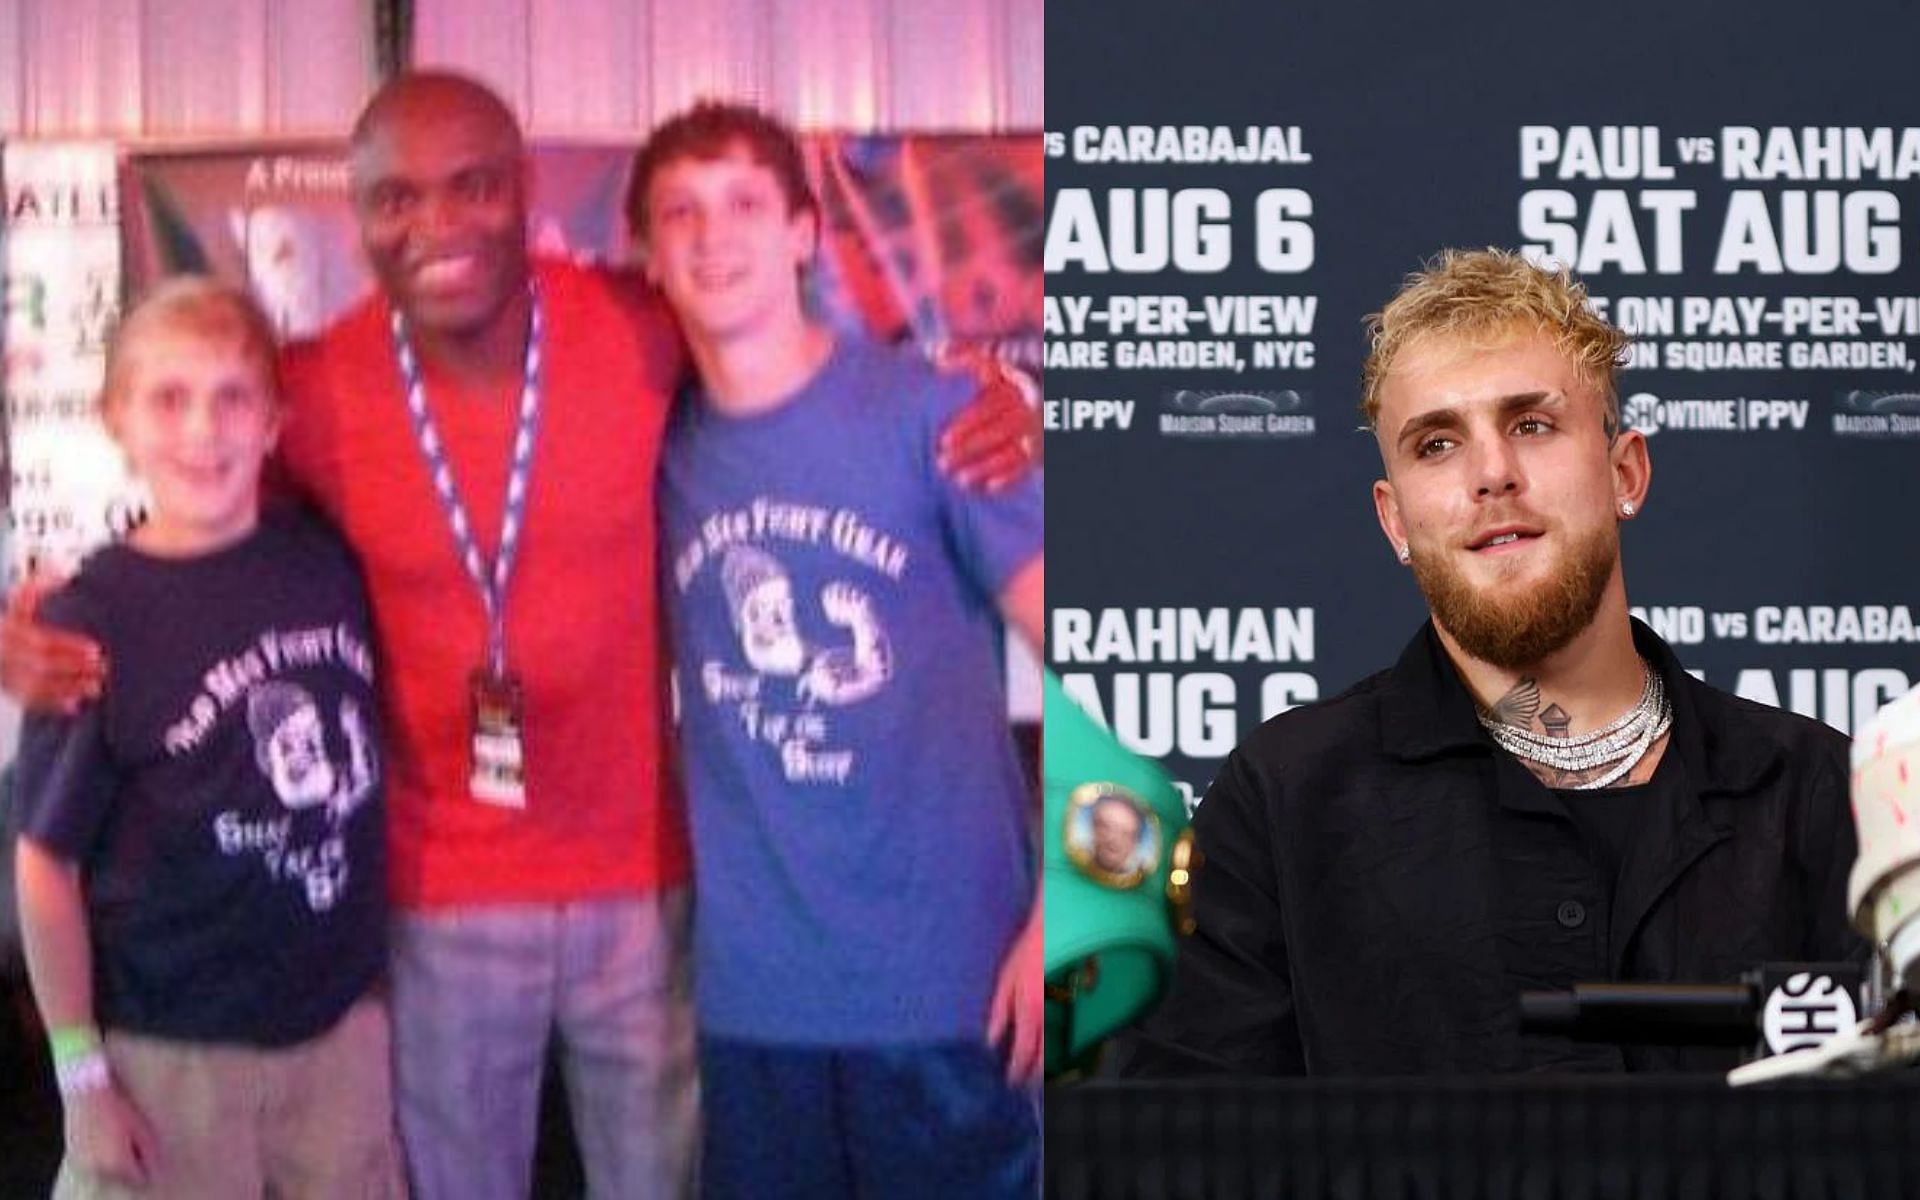 Jake Paul, Anderson Silva and Logan Paul (left)[Image courtesy: @twrecks155 on Twitter] and Jake Paul (right)